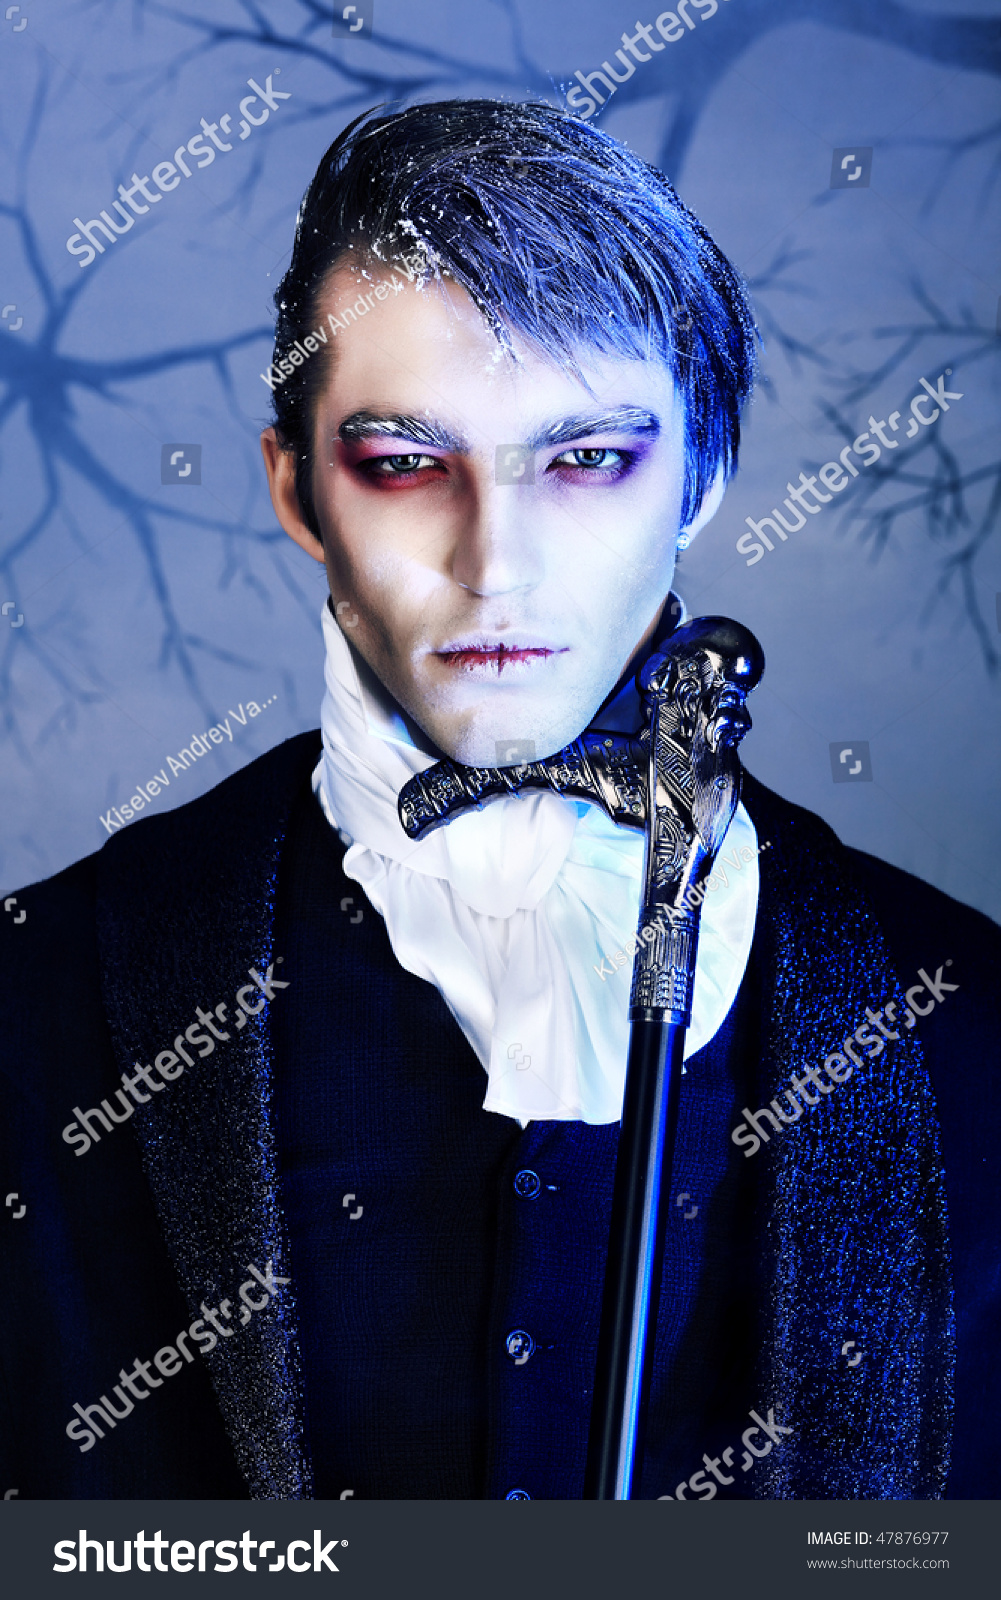 Portrait Of A Handsome Young Man With Vampire Style Make-Up. Shot In A ...